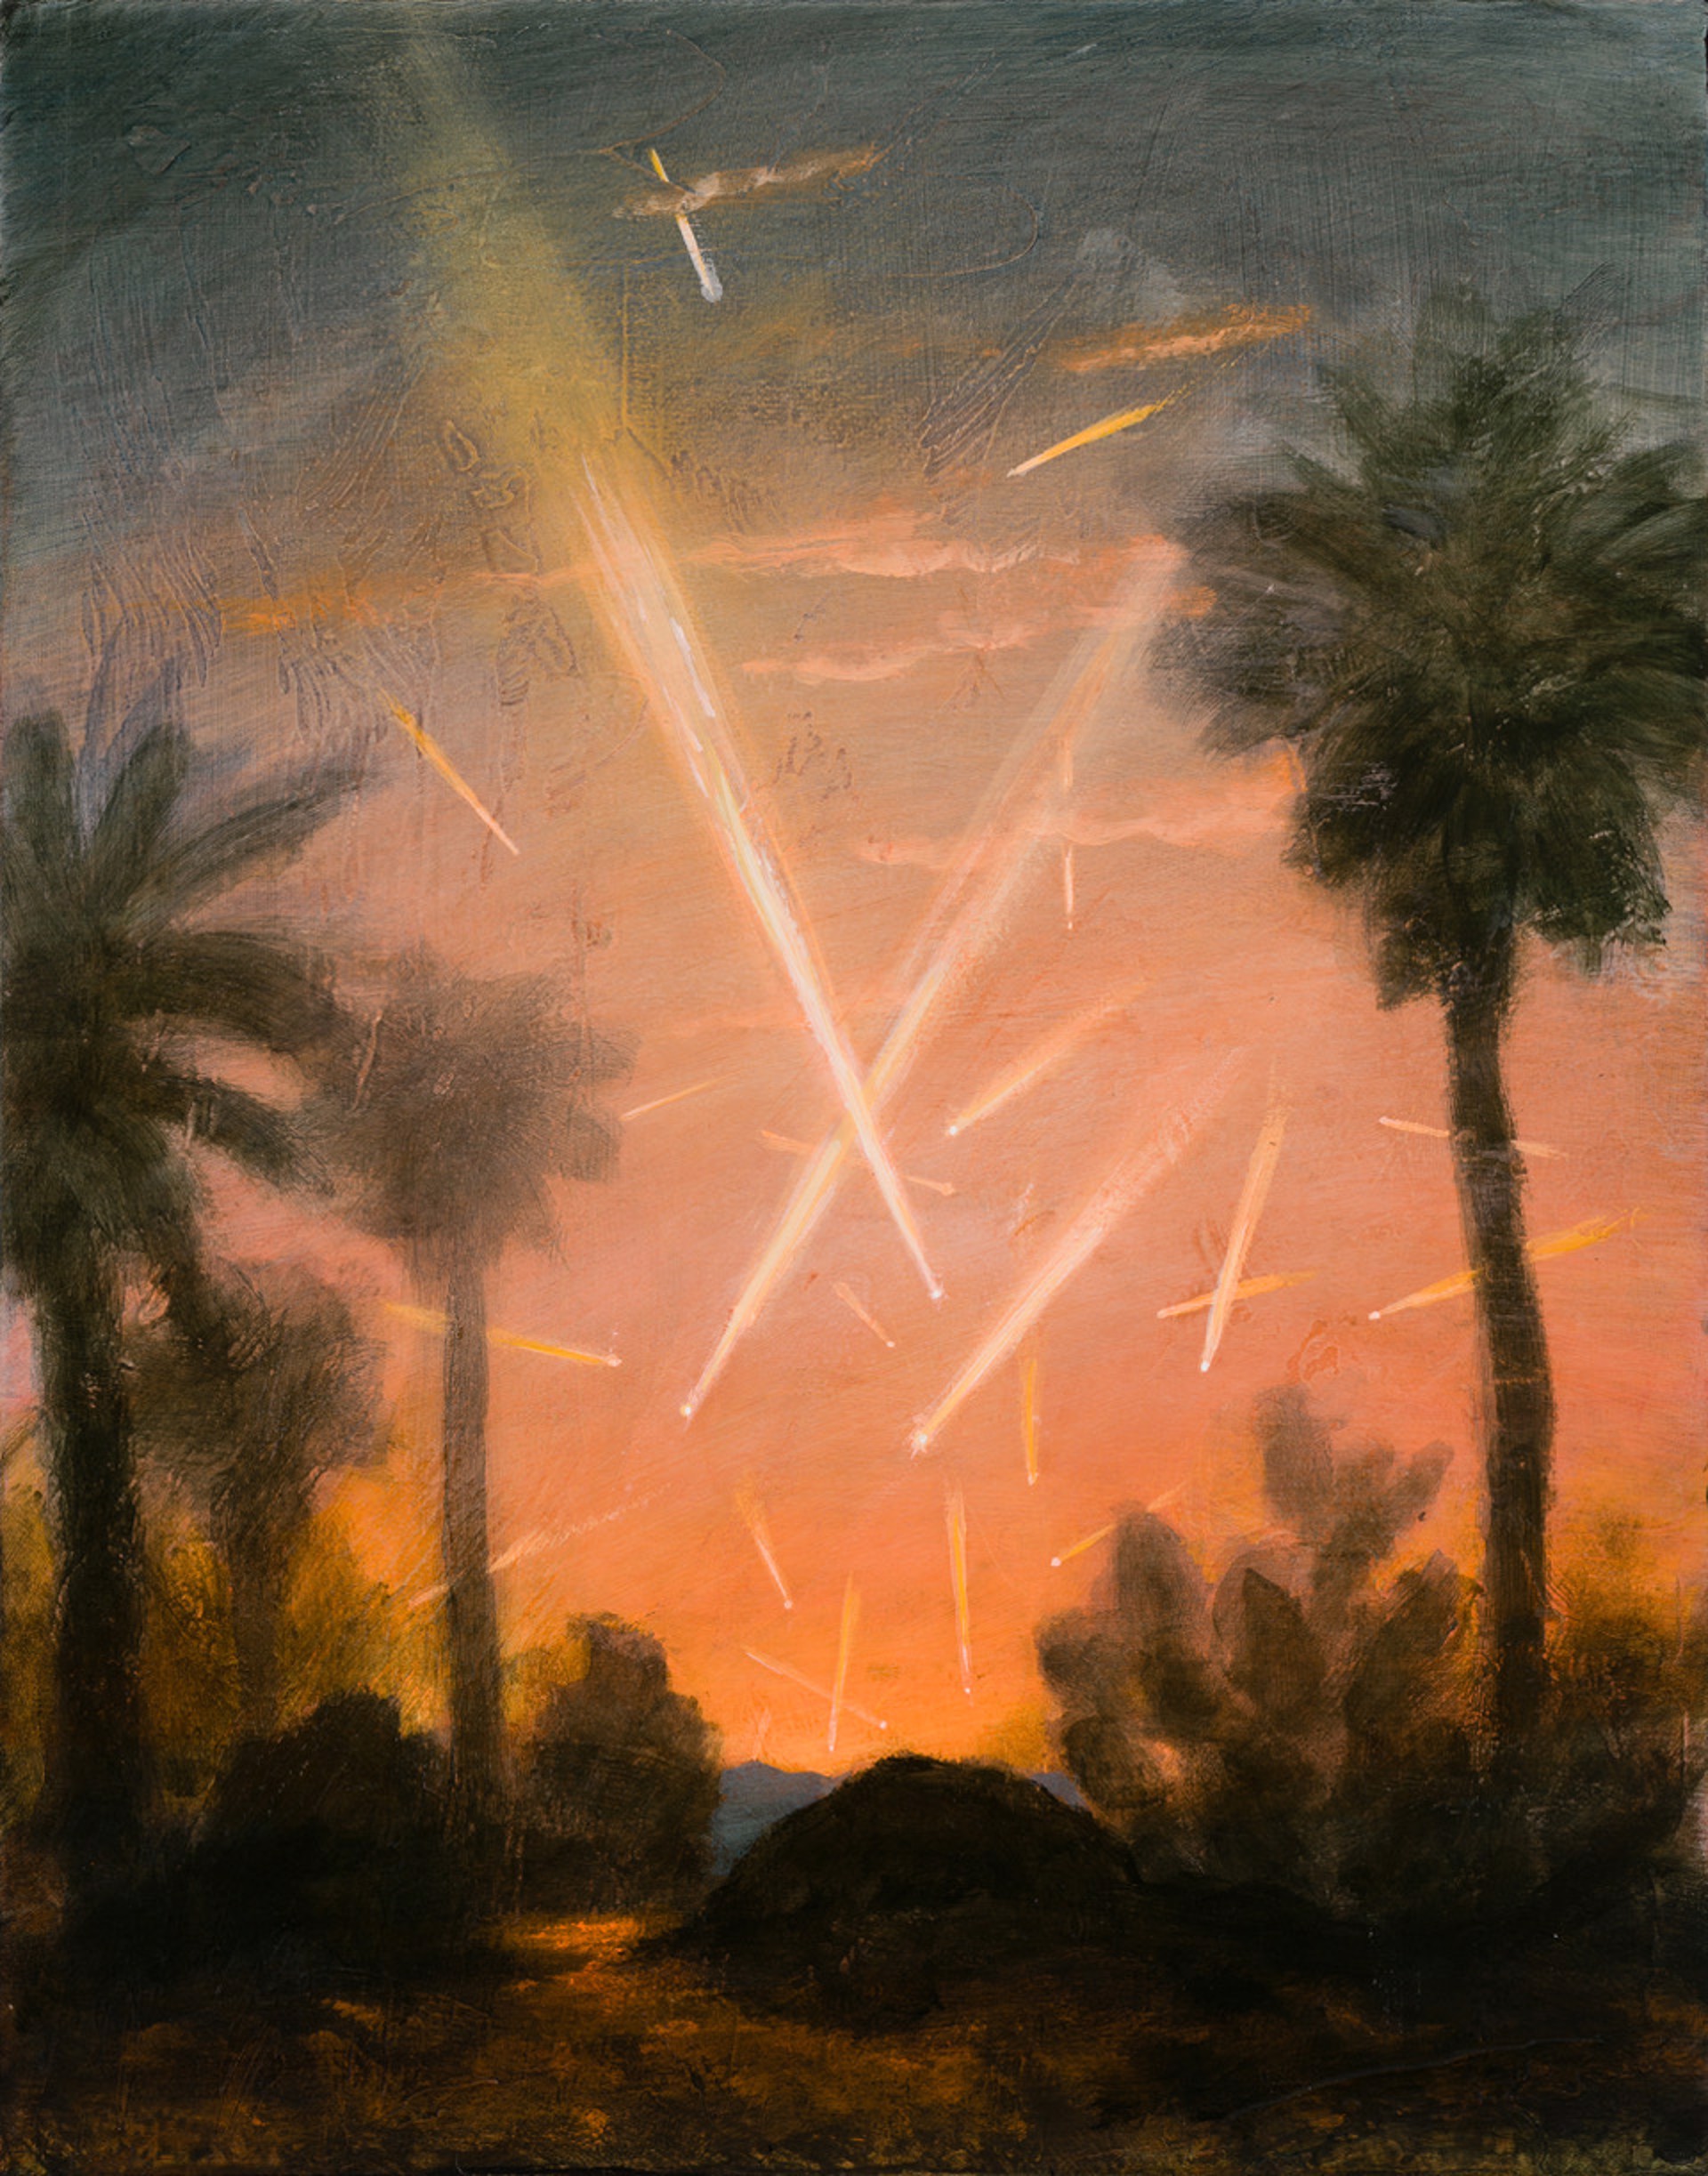 Meteors with Desert Garden by Kevin Sloan